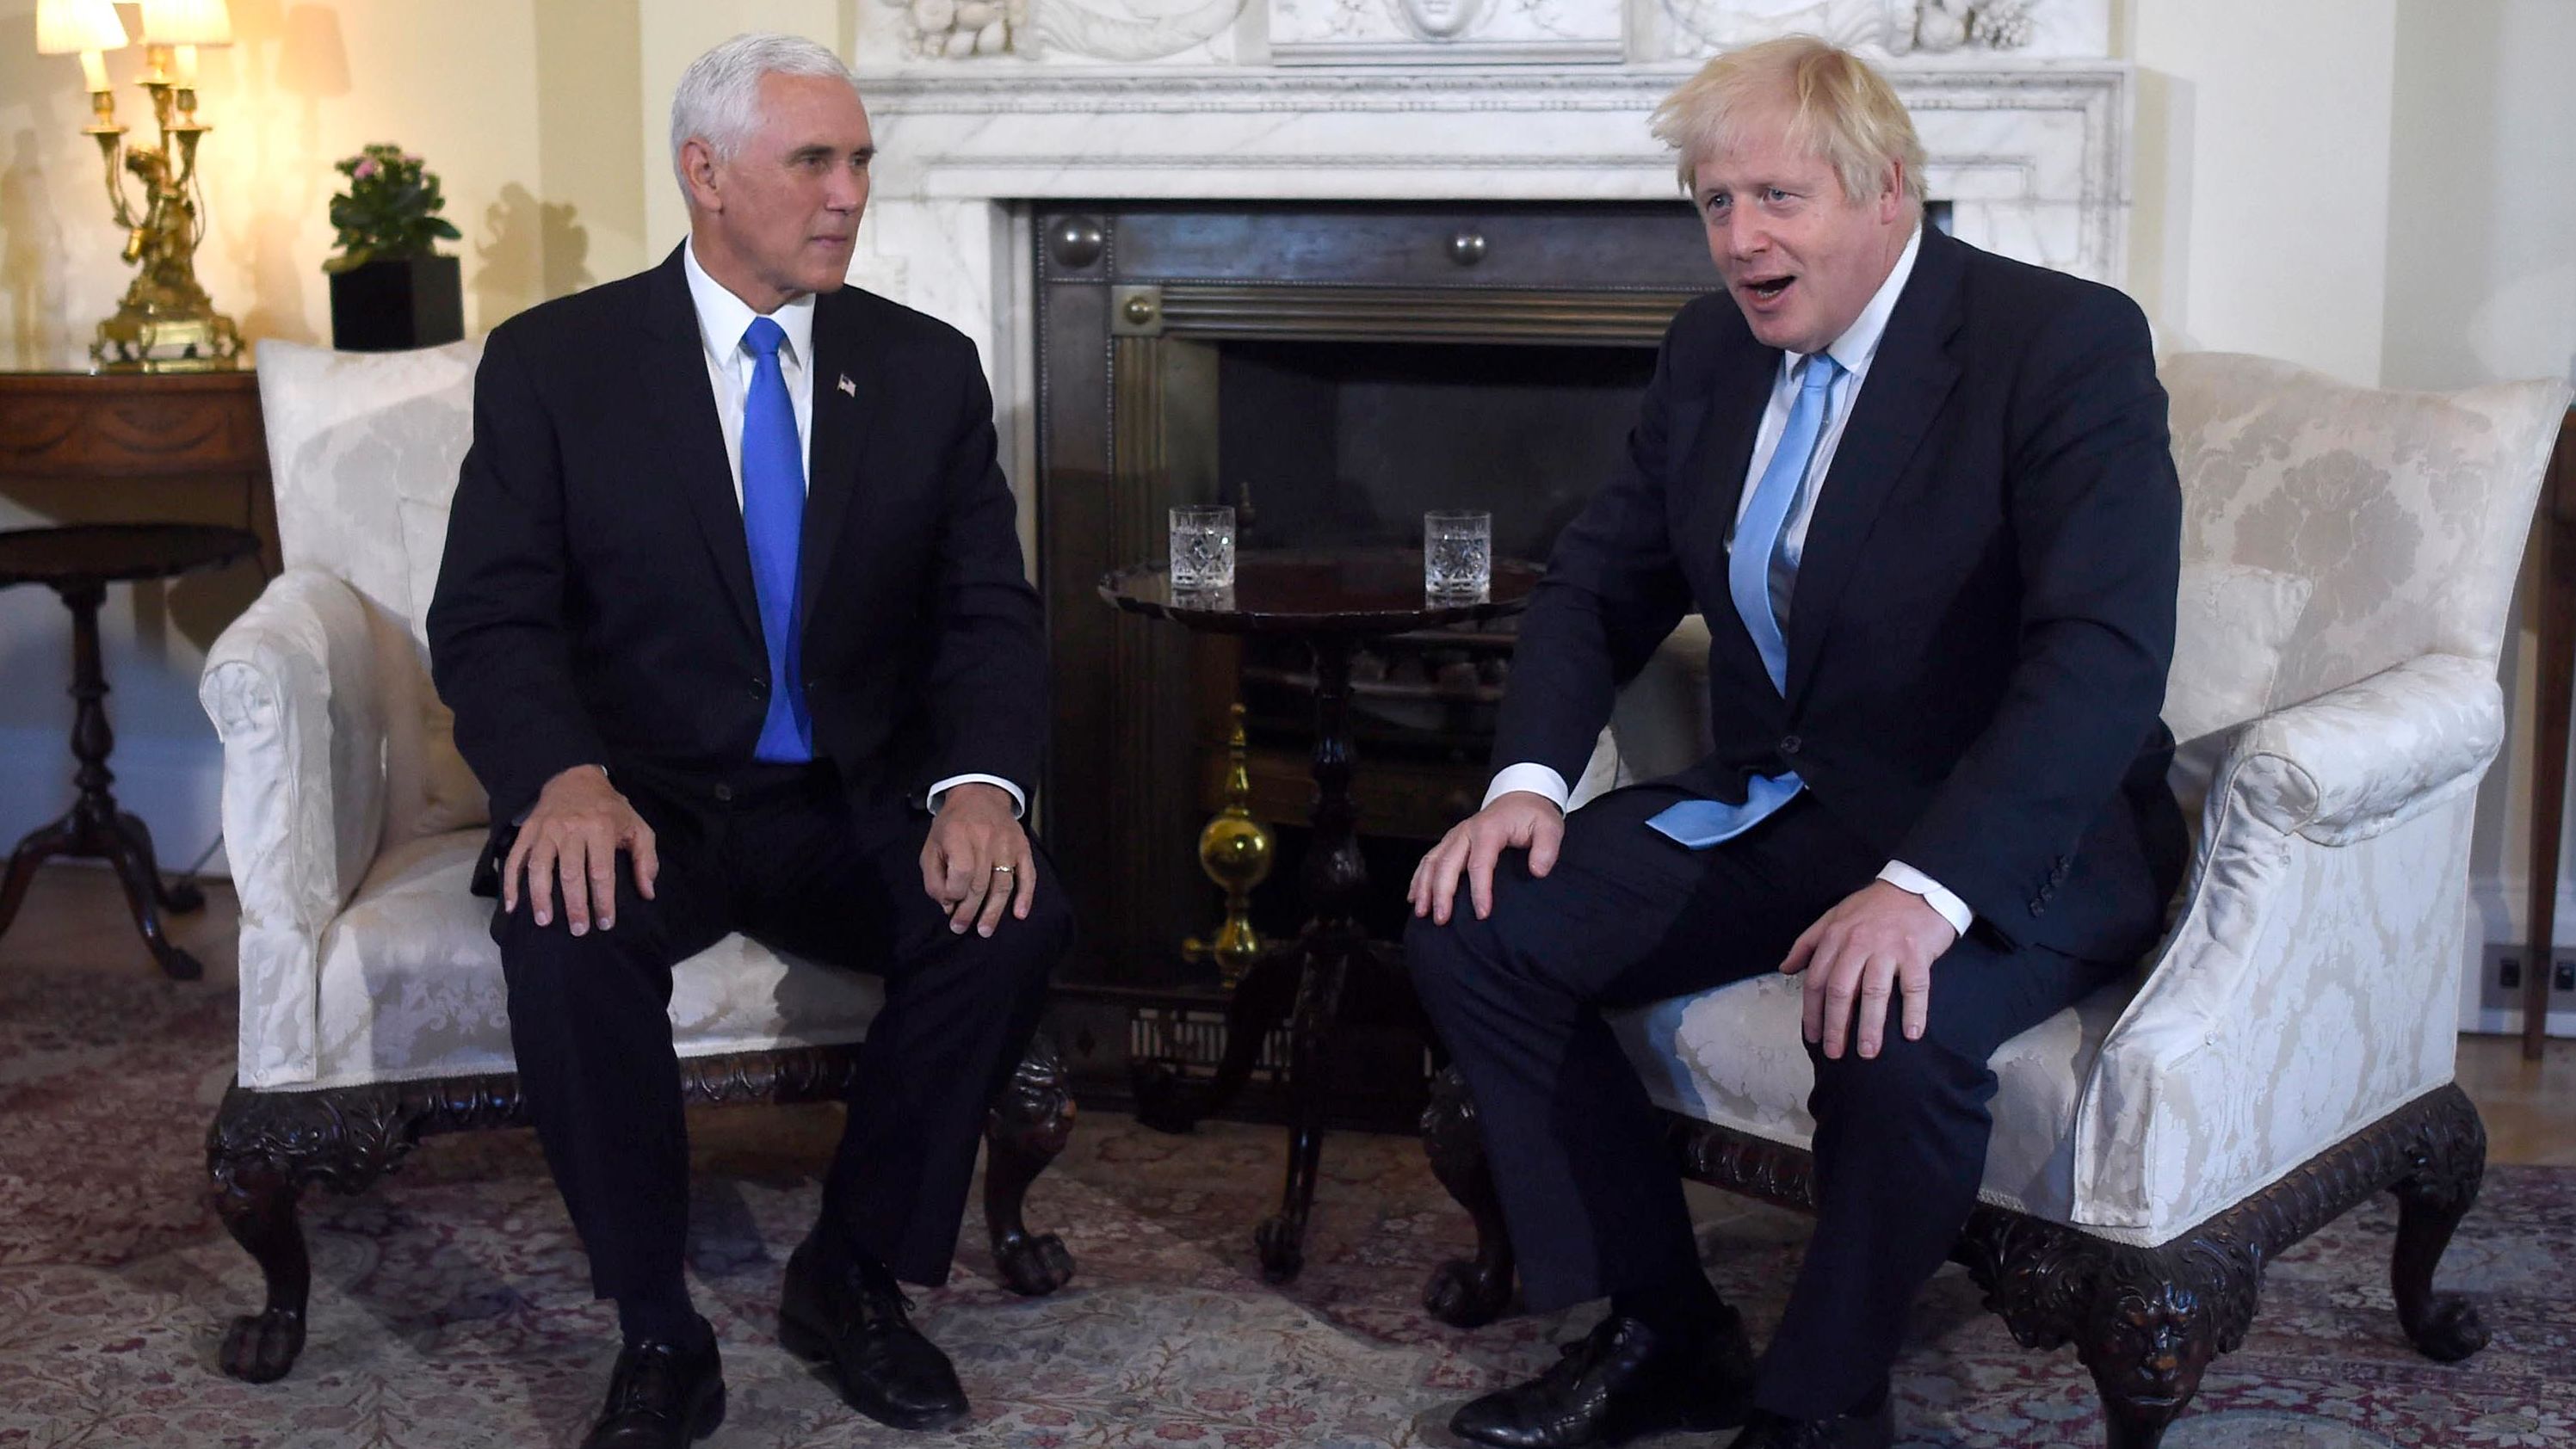 Pence meets with British Prime Minister Boris Johnson in London in September 2019.